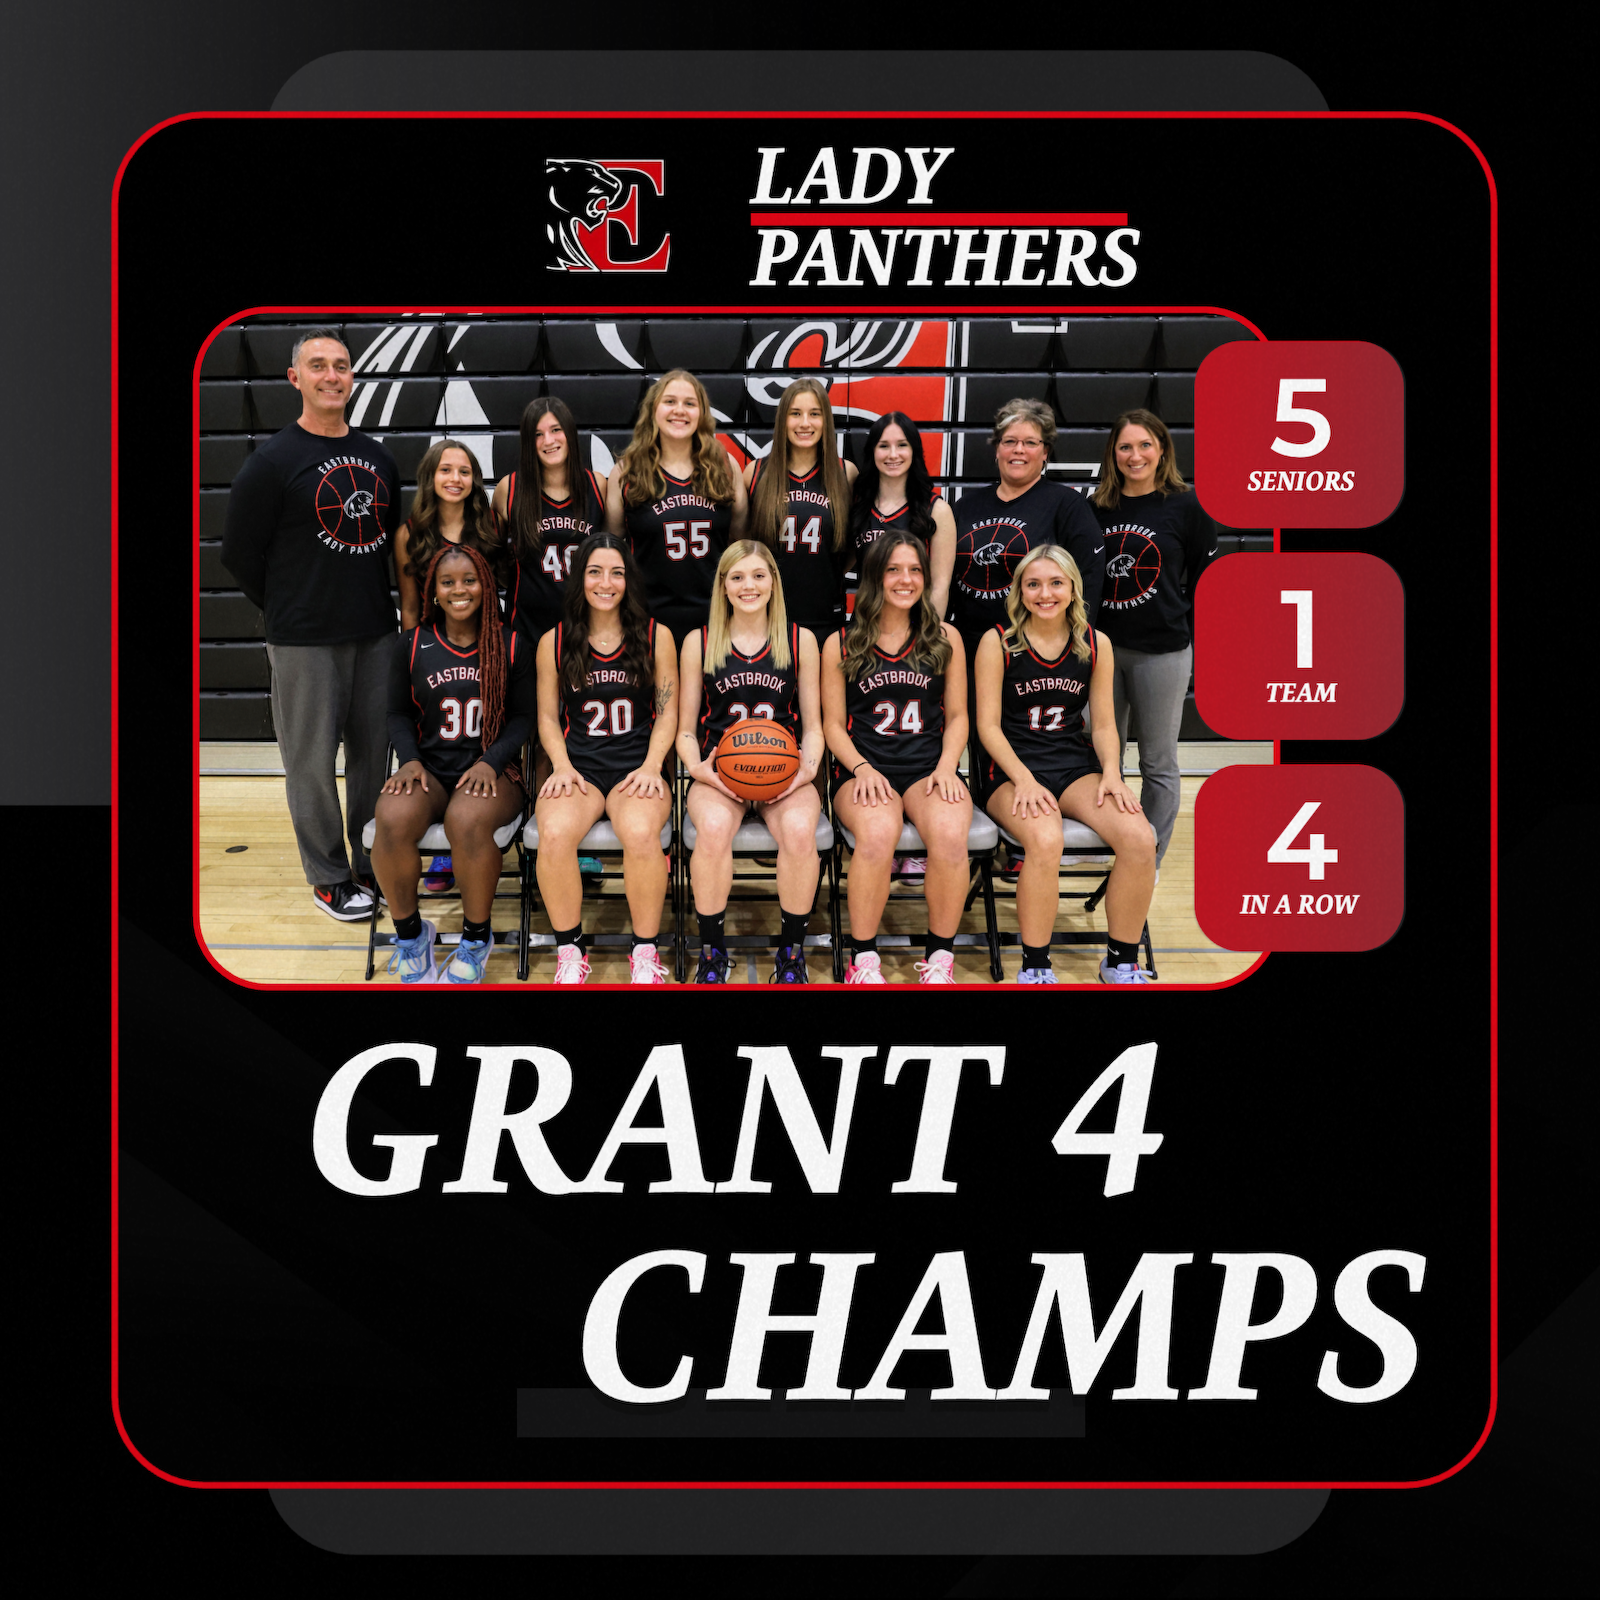 GRANT4CHAMPS 3530177.png